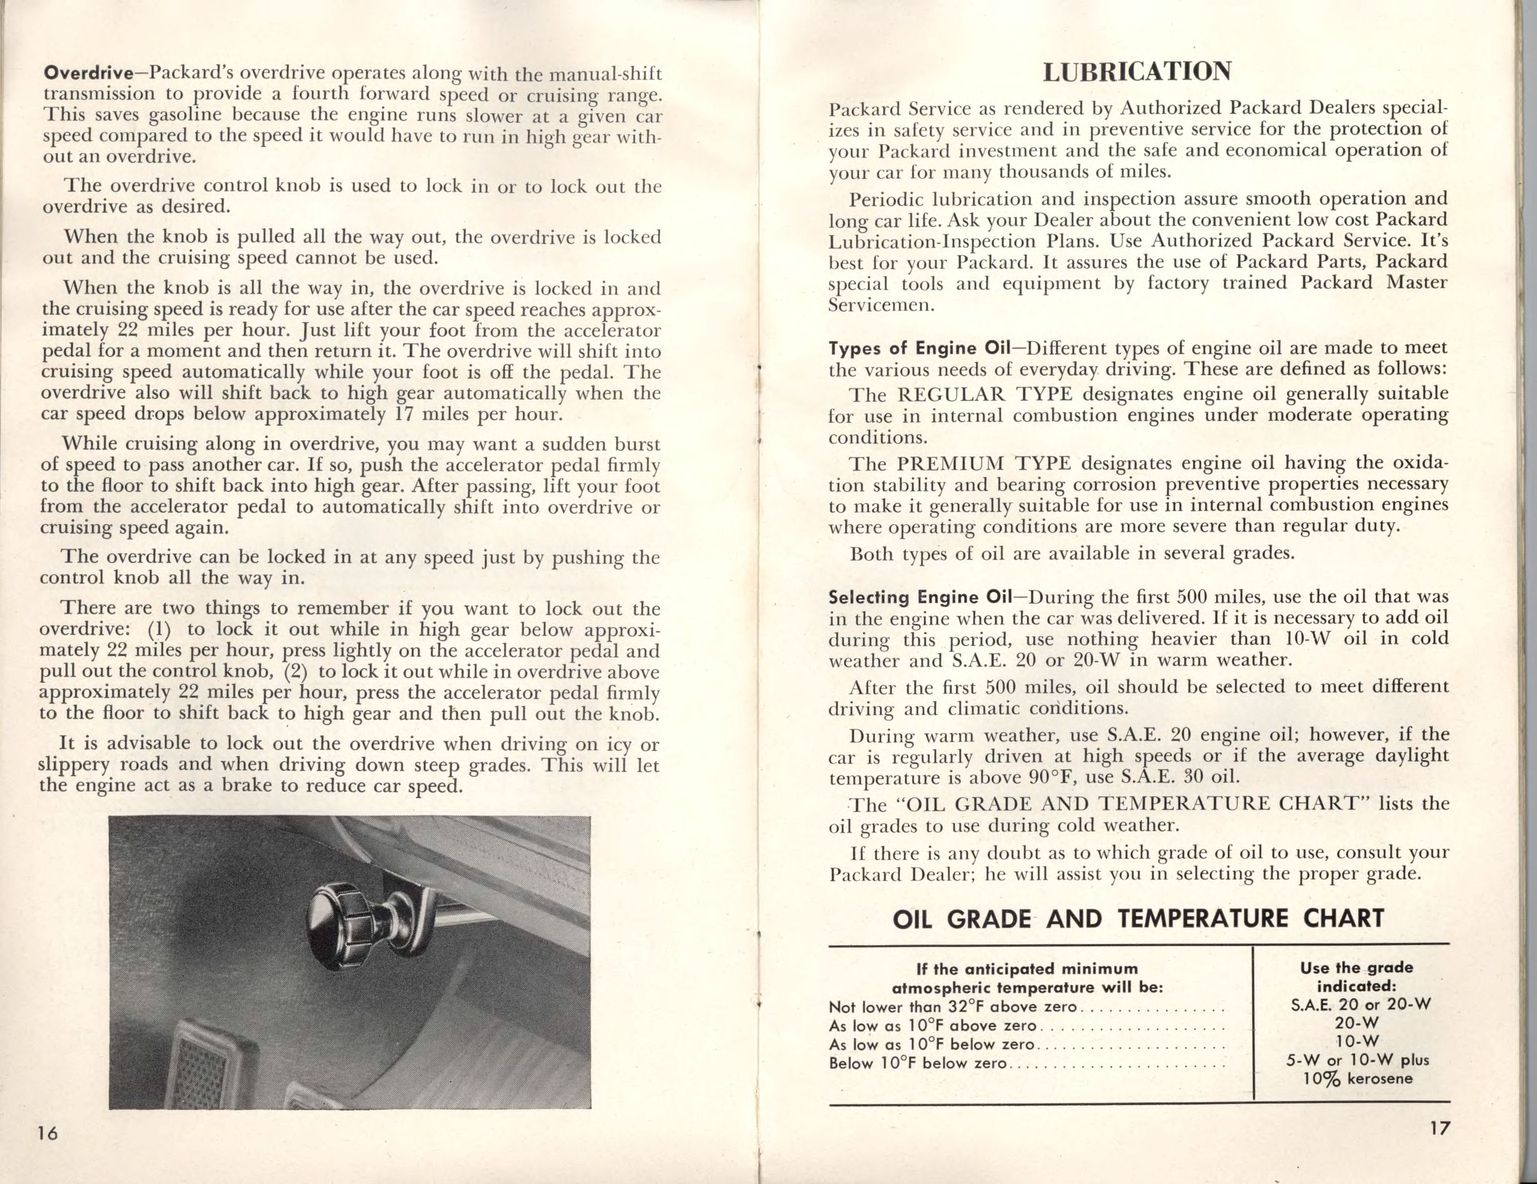 1951 Packard Owners Manual Page 13